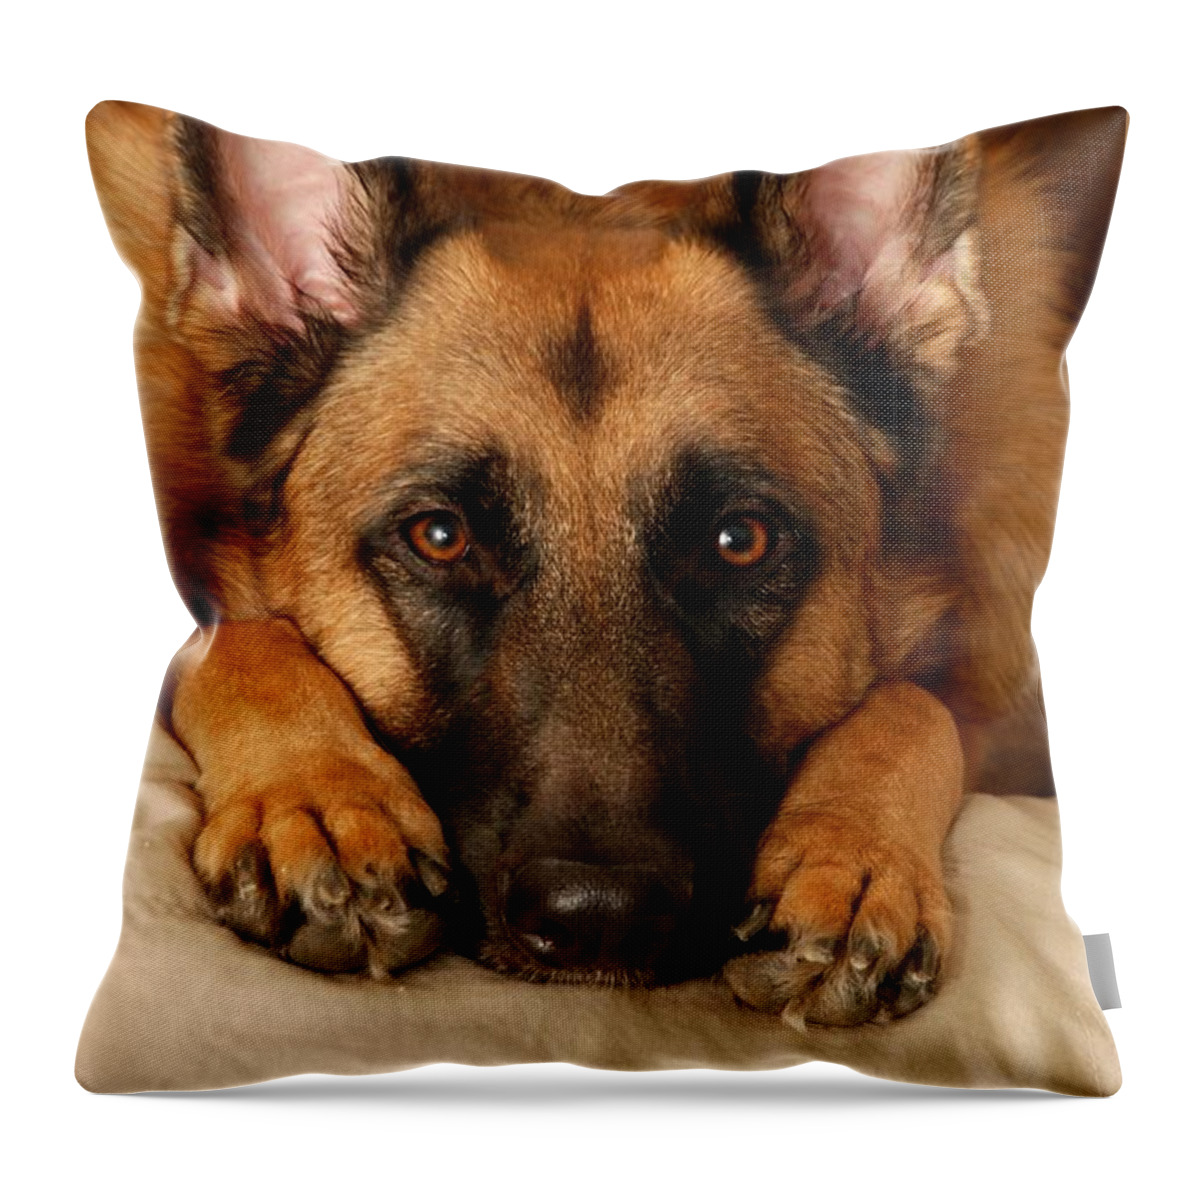 German Shepherd Dogs Throw Pillow featuring the photograph My Loyal Friend by Angie Tirado